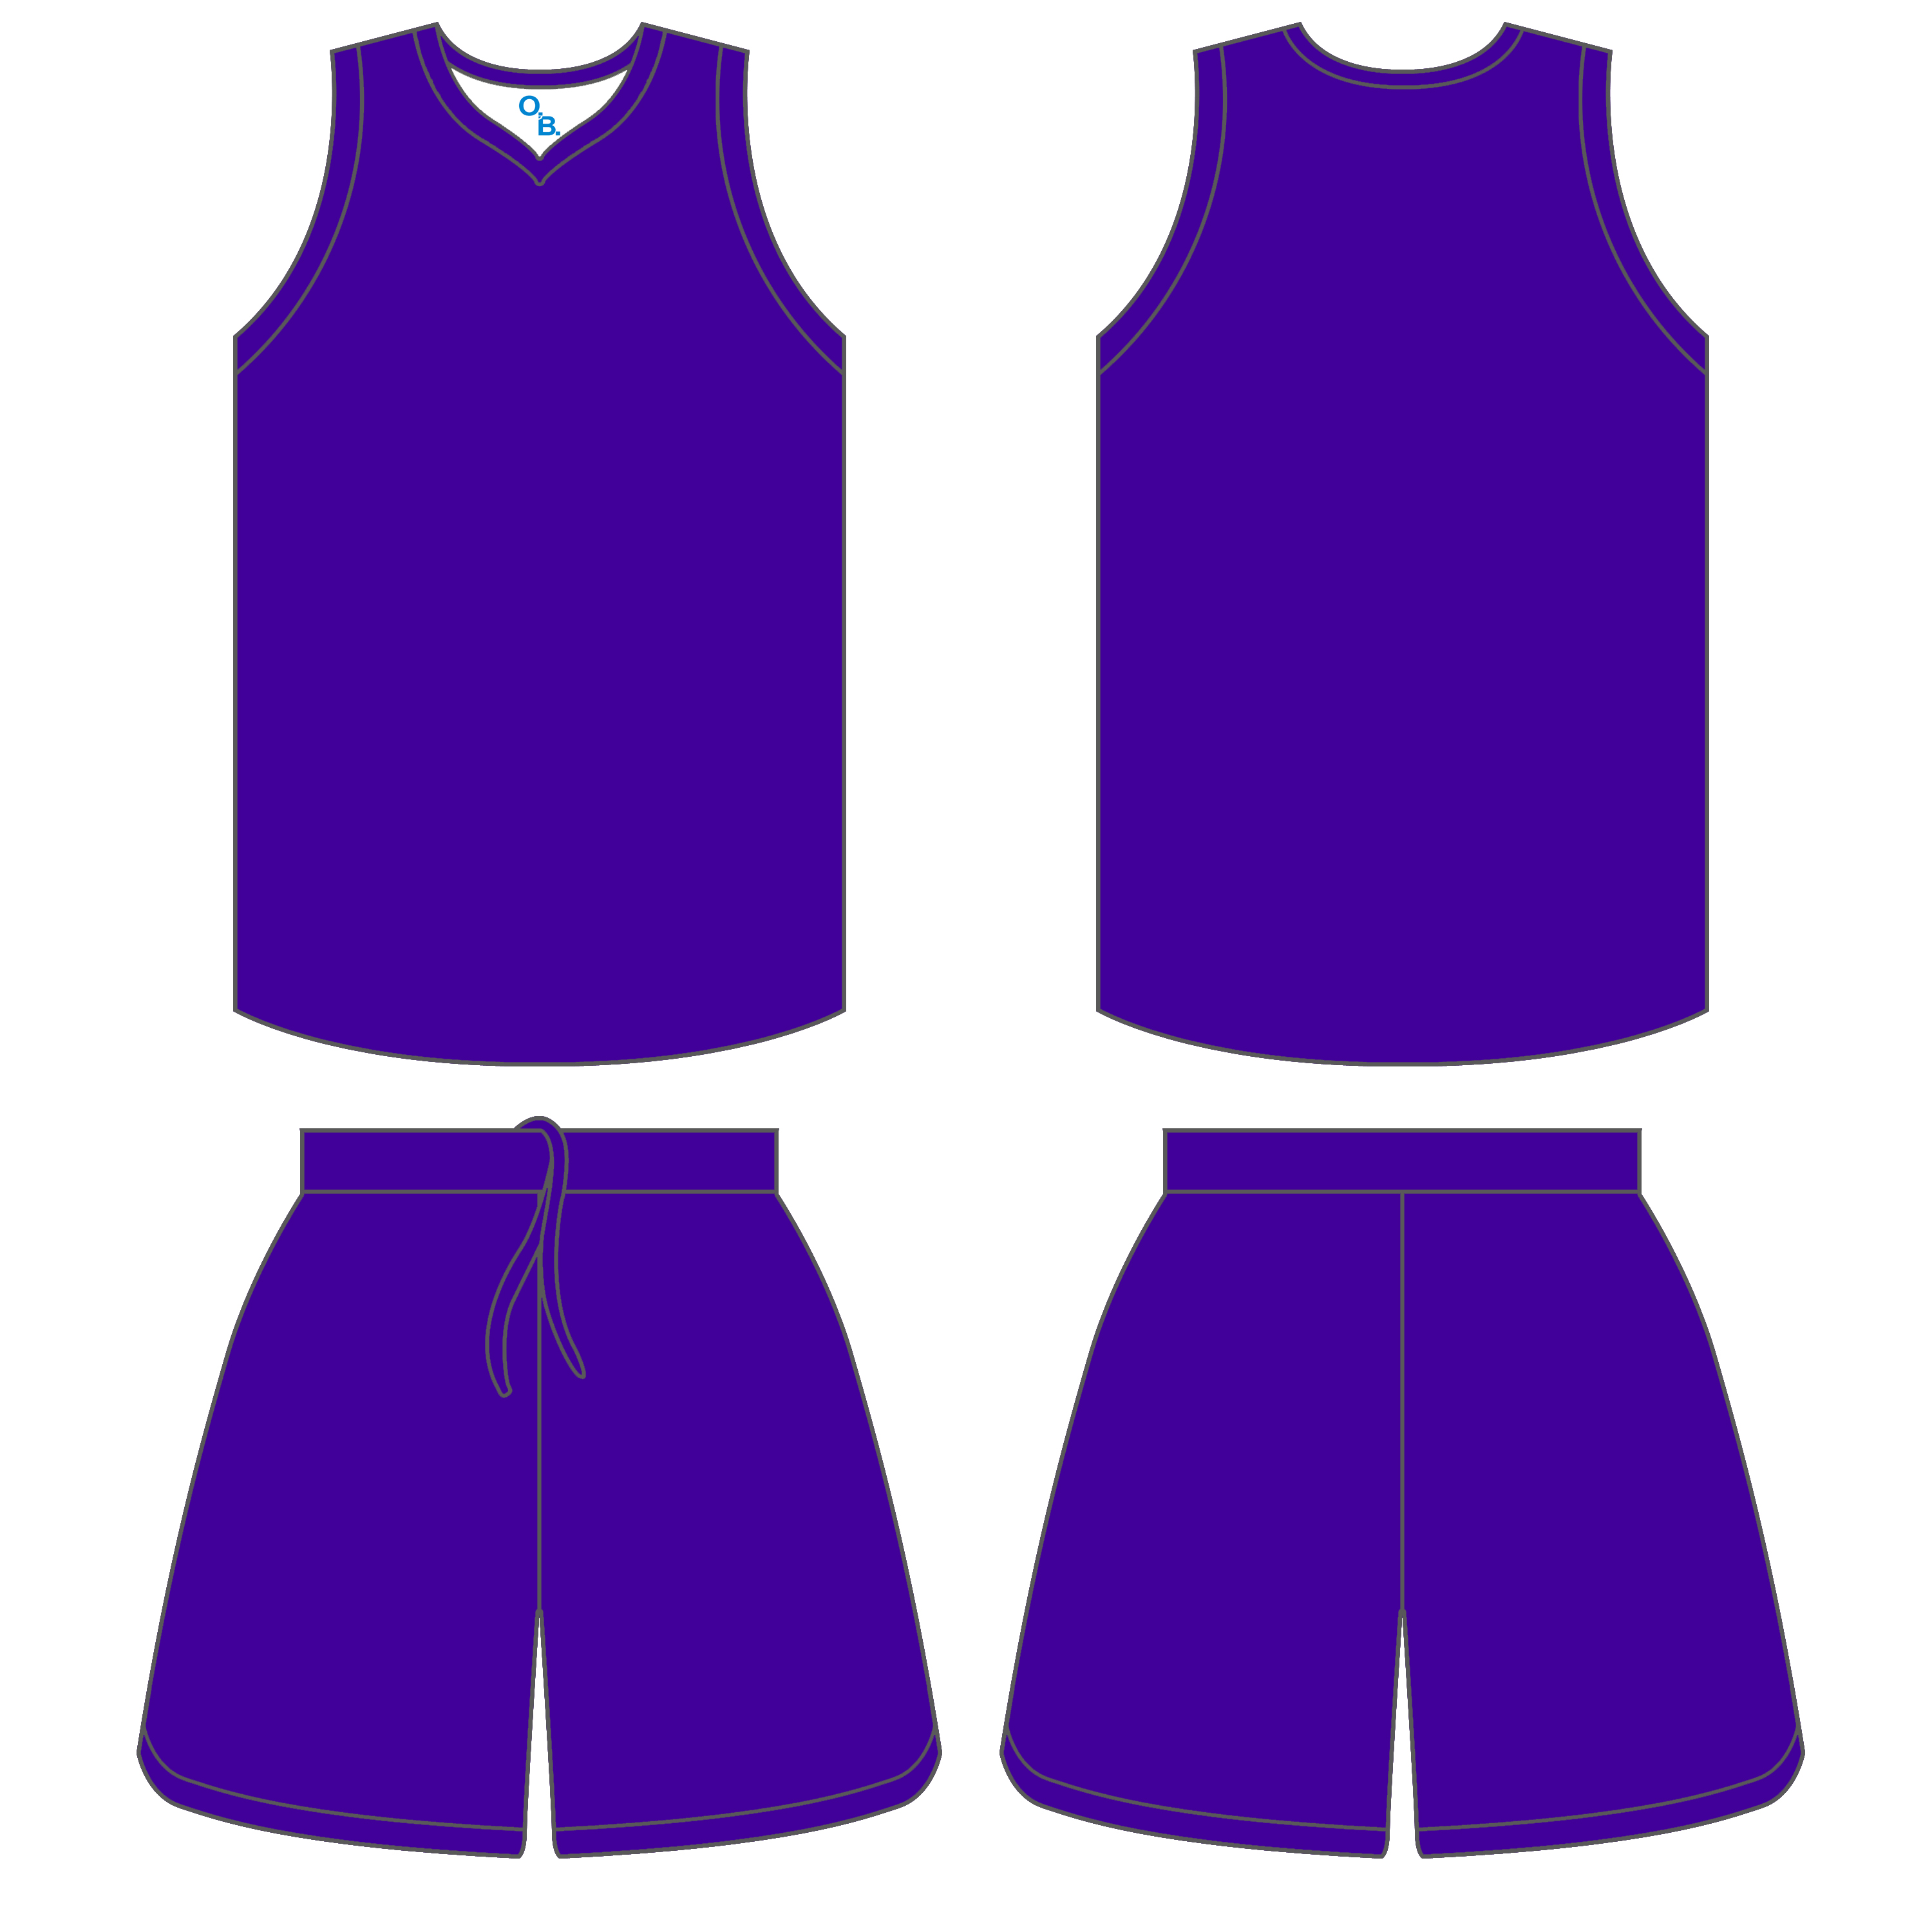 Clipart library: More Like Basketball Uniform Template 1 by TimeOBrien